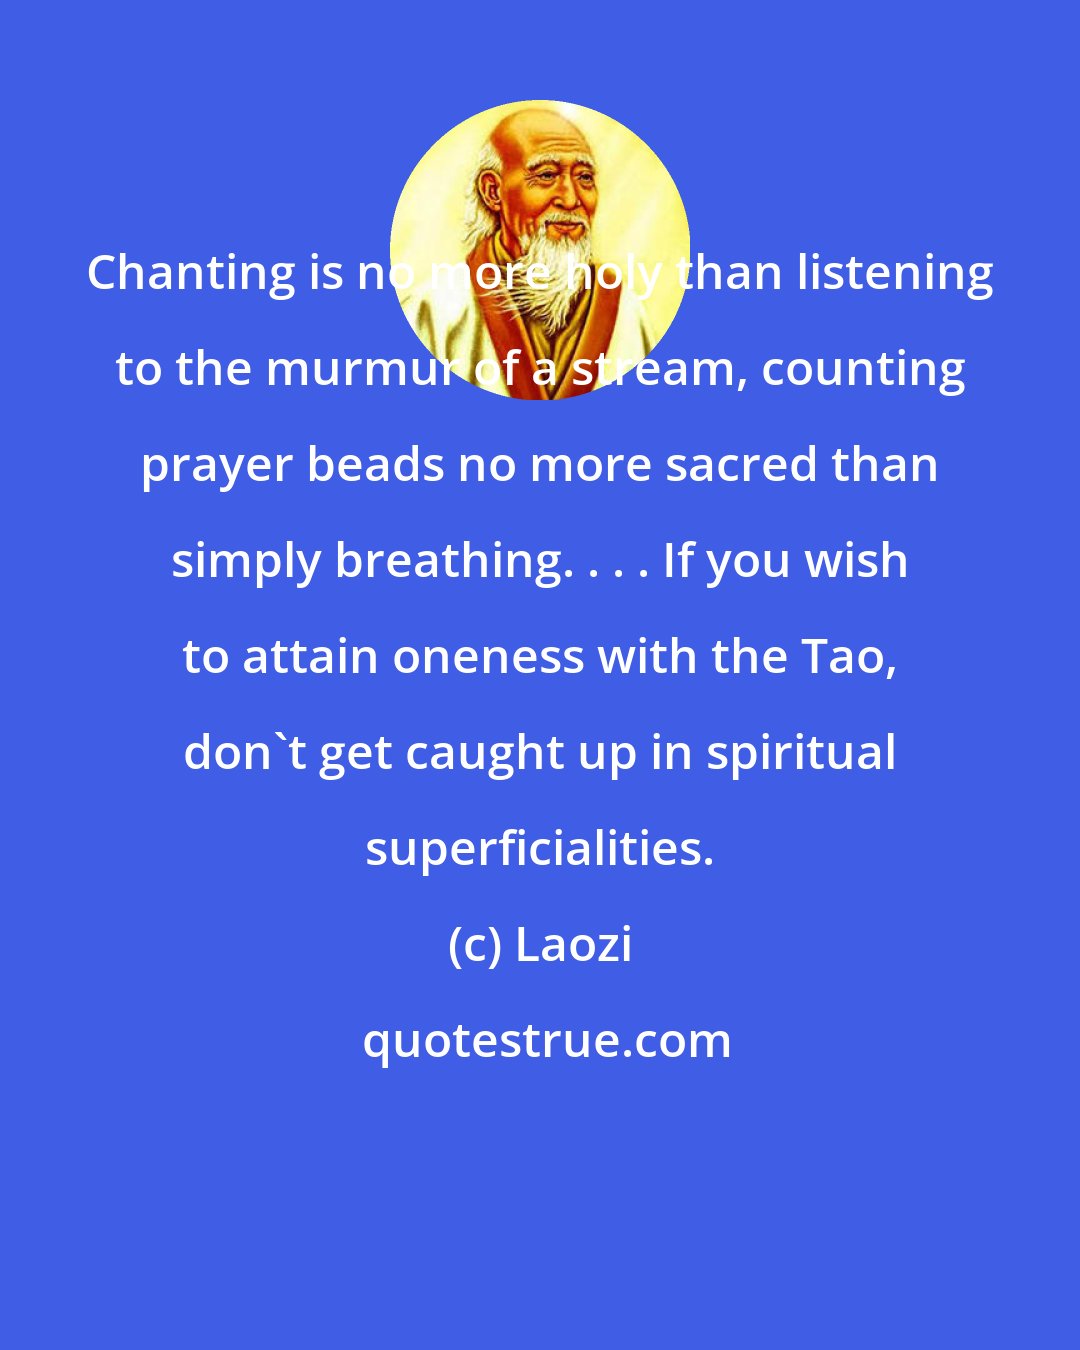 Laozi: Chanting is no more holy than listening to the murmur of a stream, counting prayer beads no more sacred than simply breathing. . . . If you wish to attain oneness with the Tao, don't get caught up in spiritual superficialities.